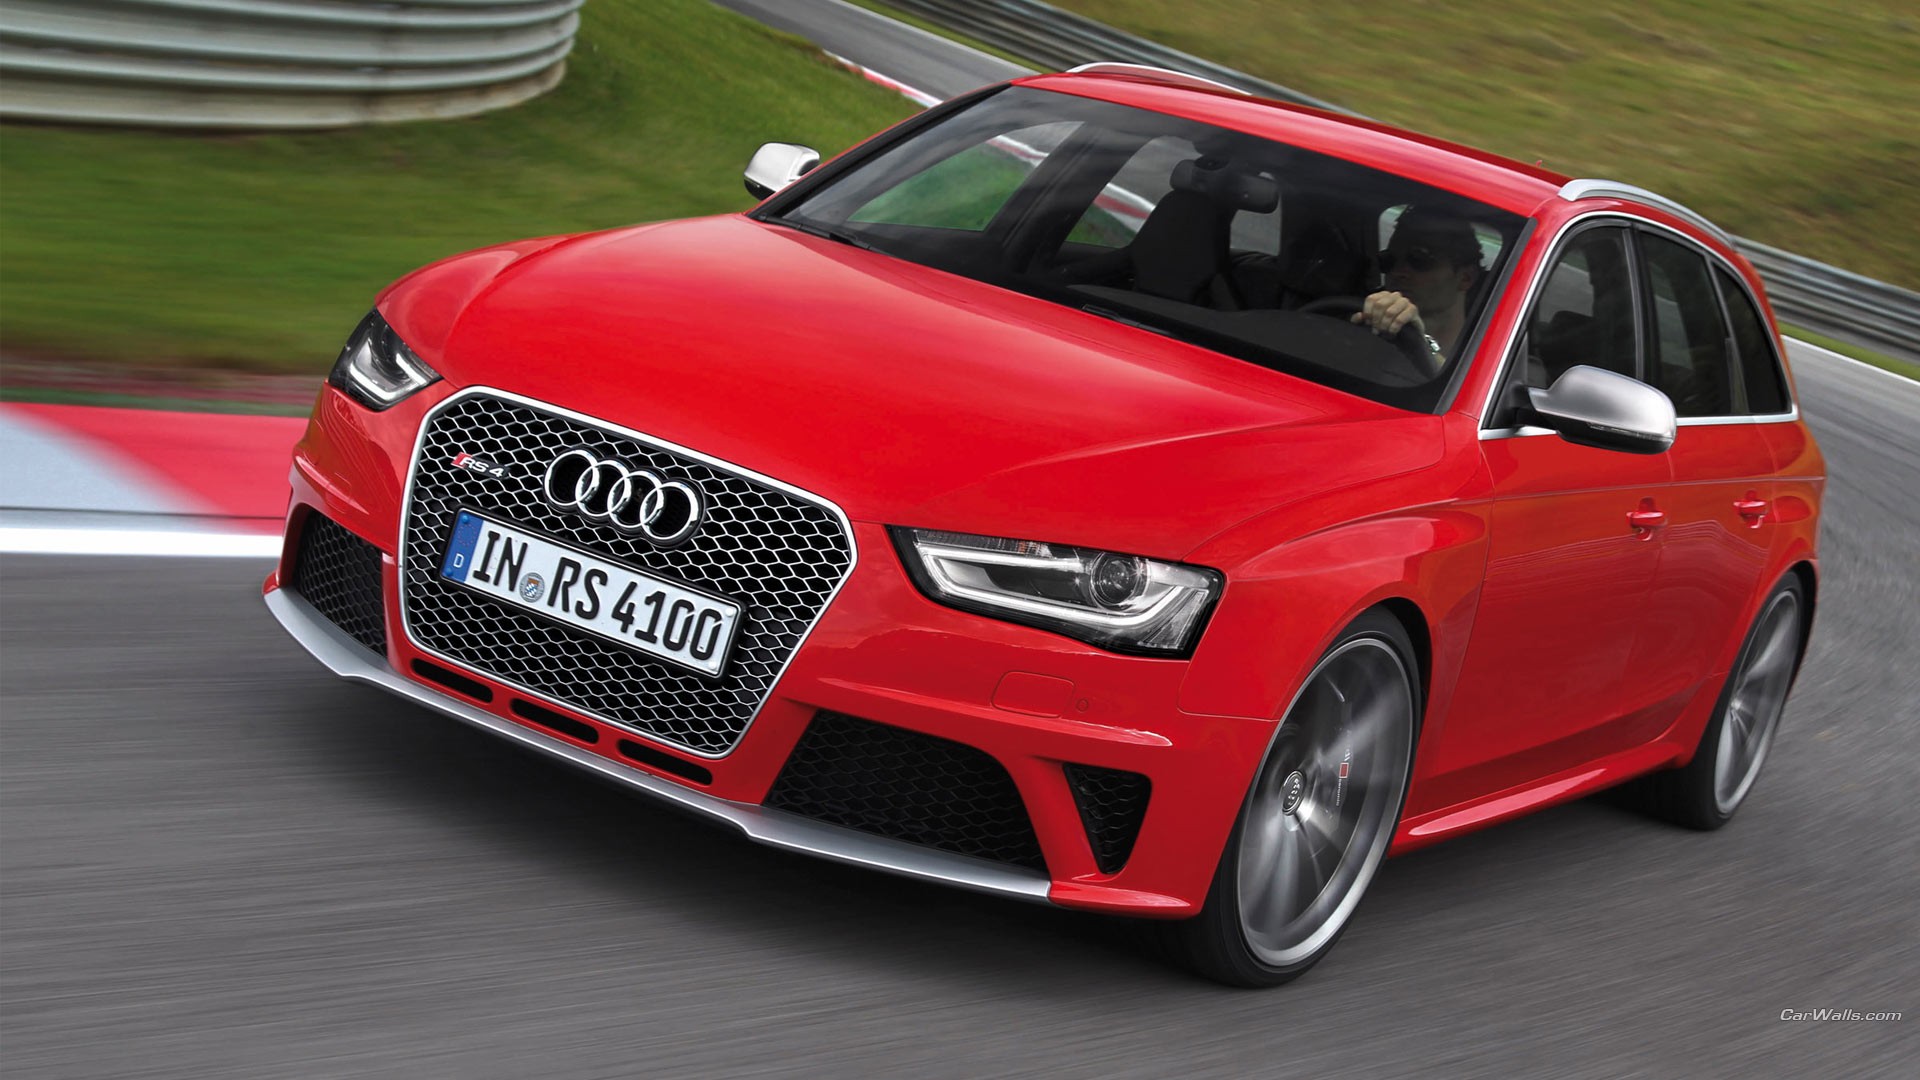 General 1920x1080 Audi RS4 car Audi red cars station wagon vehicle German cars Volkswagen Group